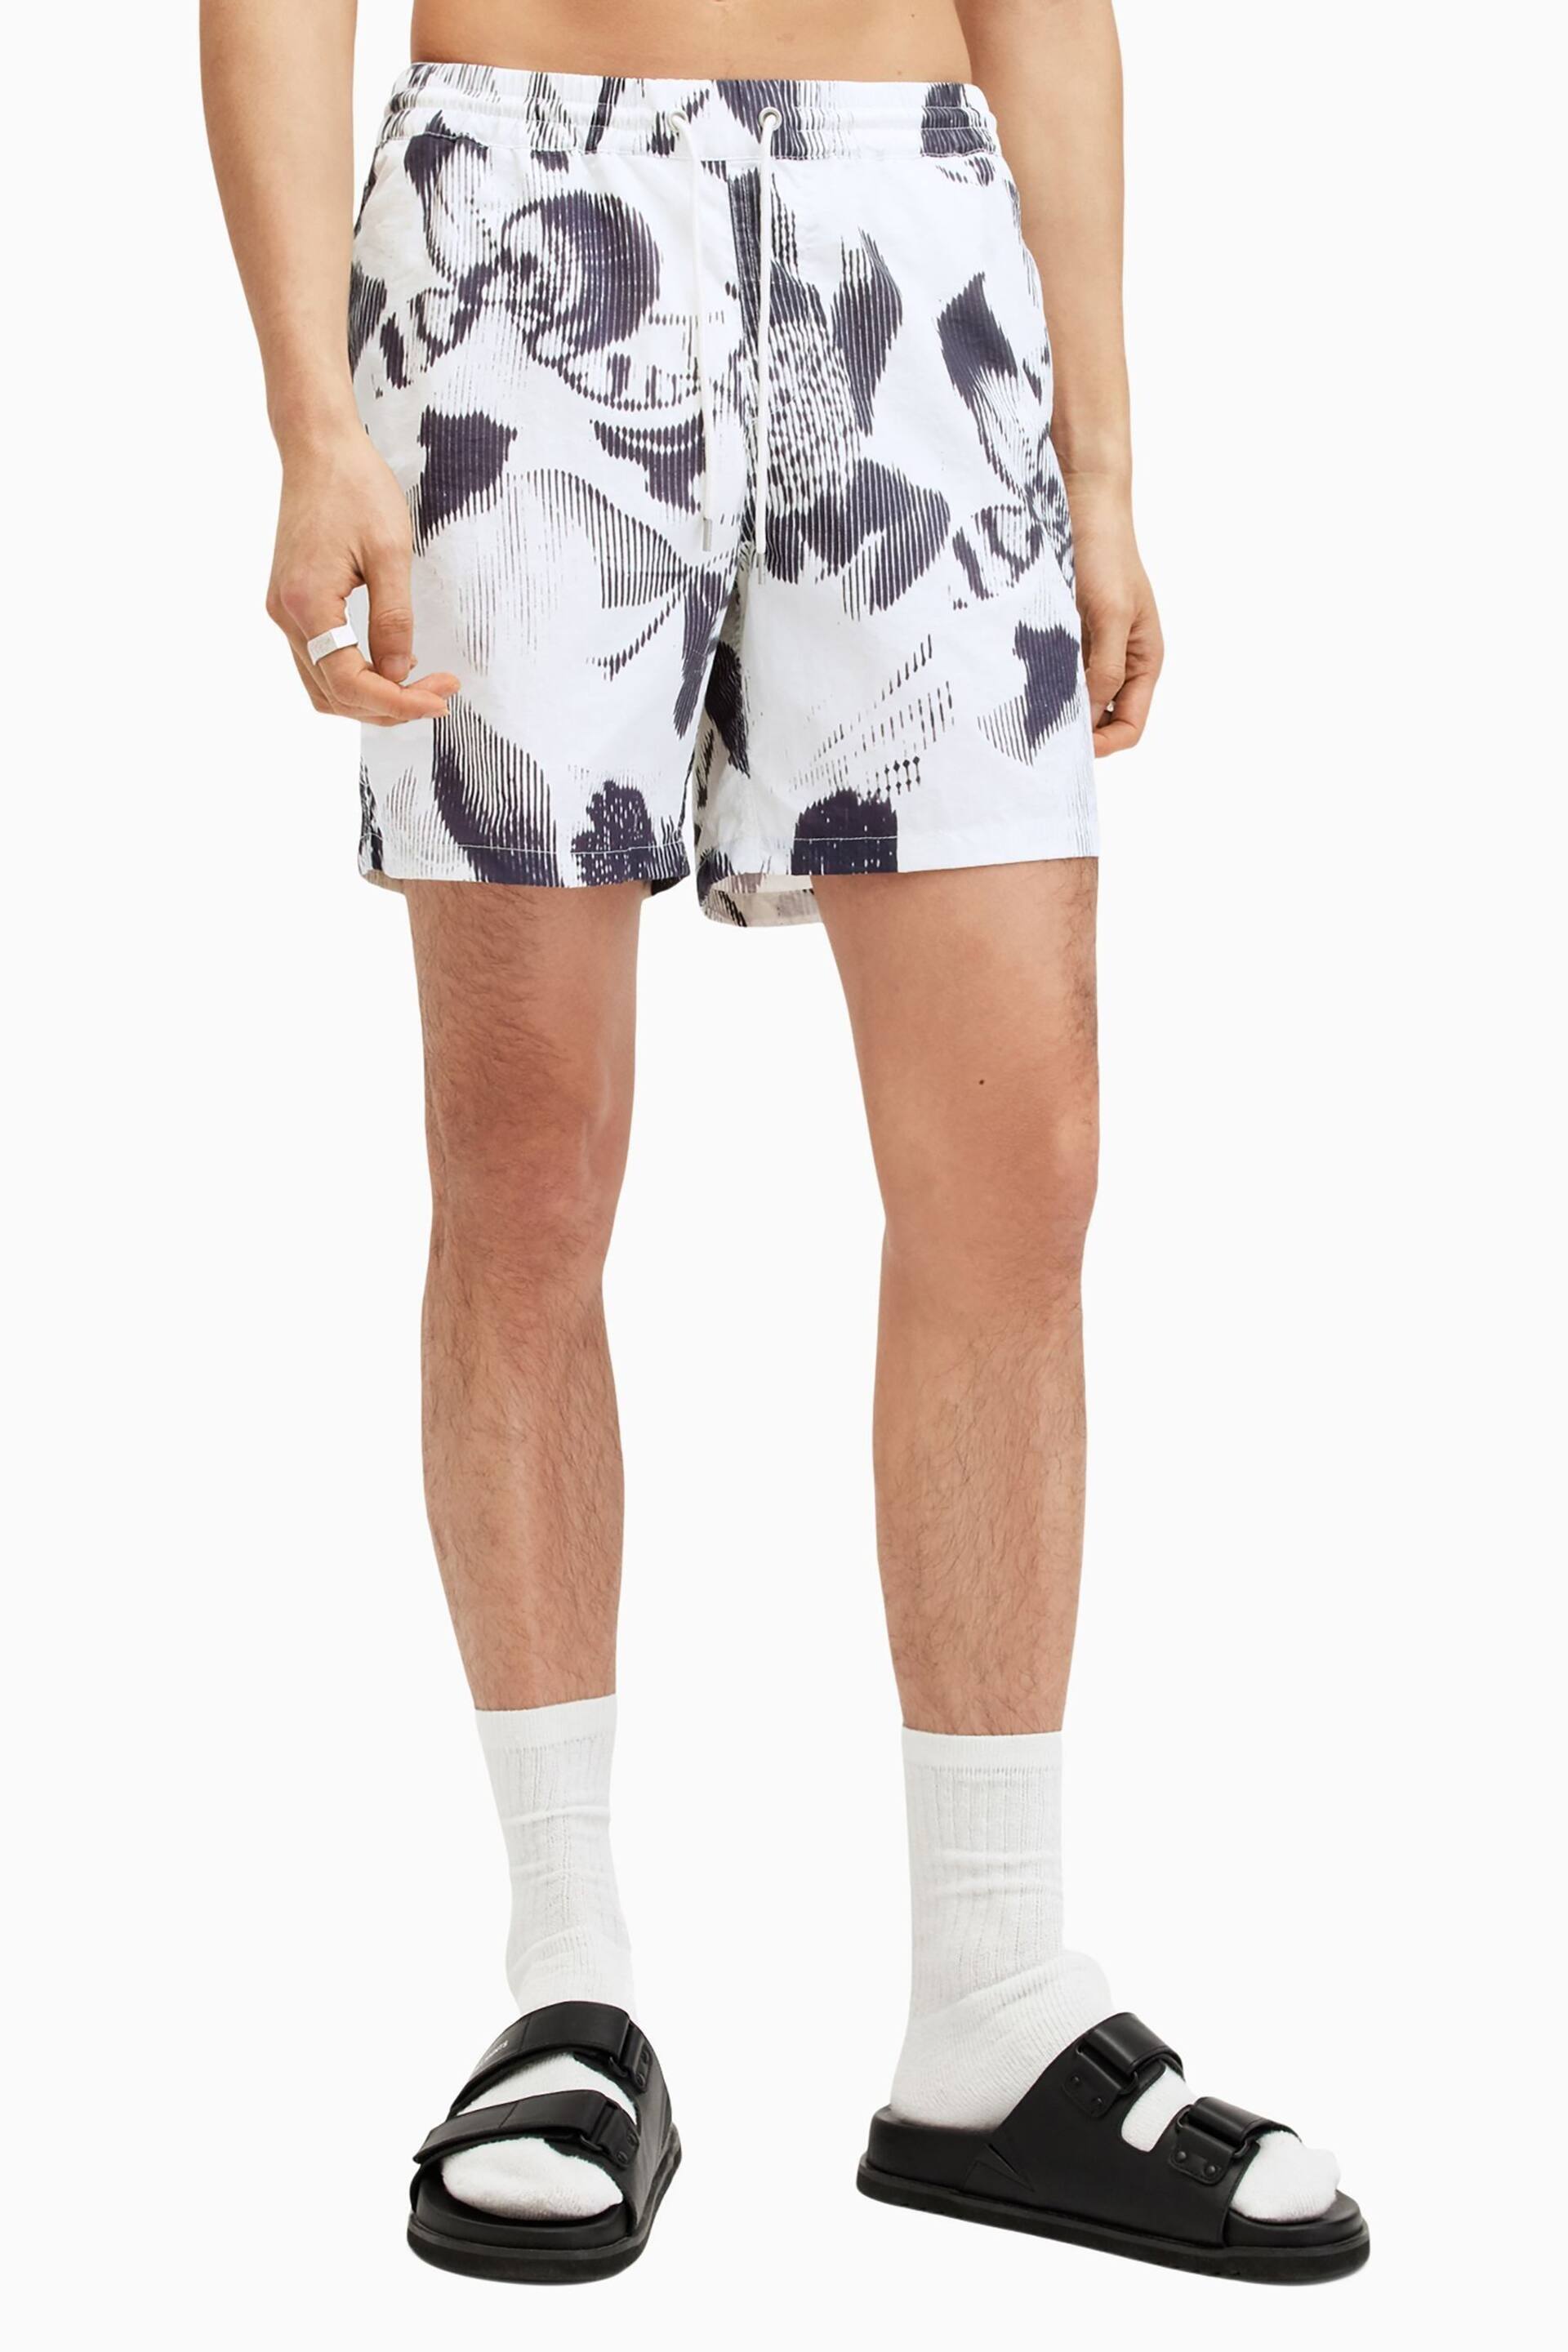 AllSaints White Frequency Swim Shorts - Image 4 of 9